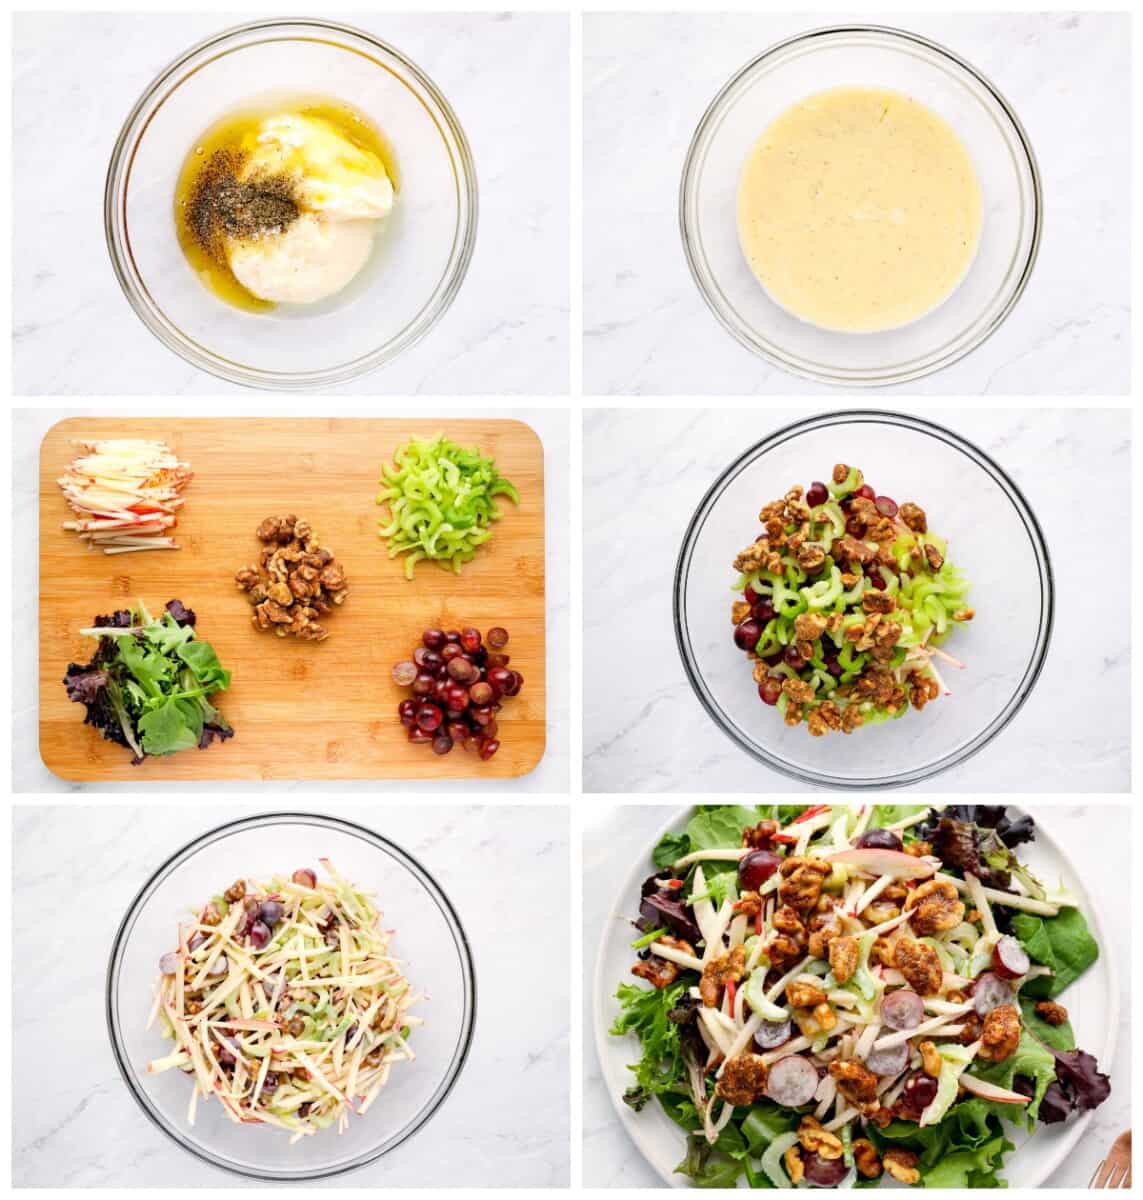 how to make a Waldorf salad step by step photo instructions